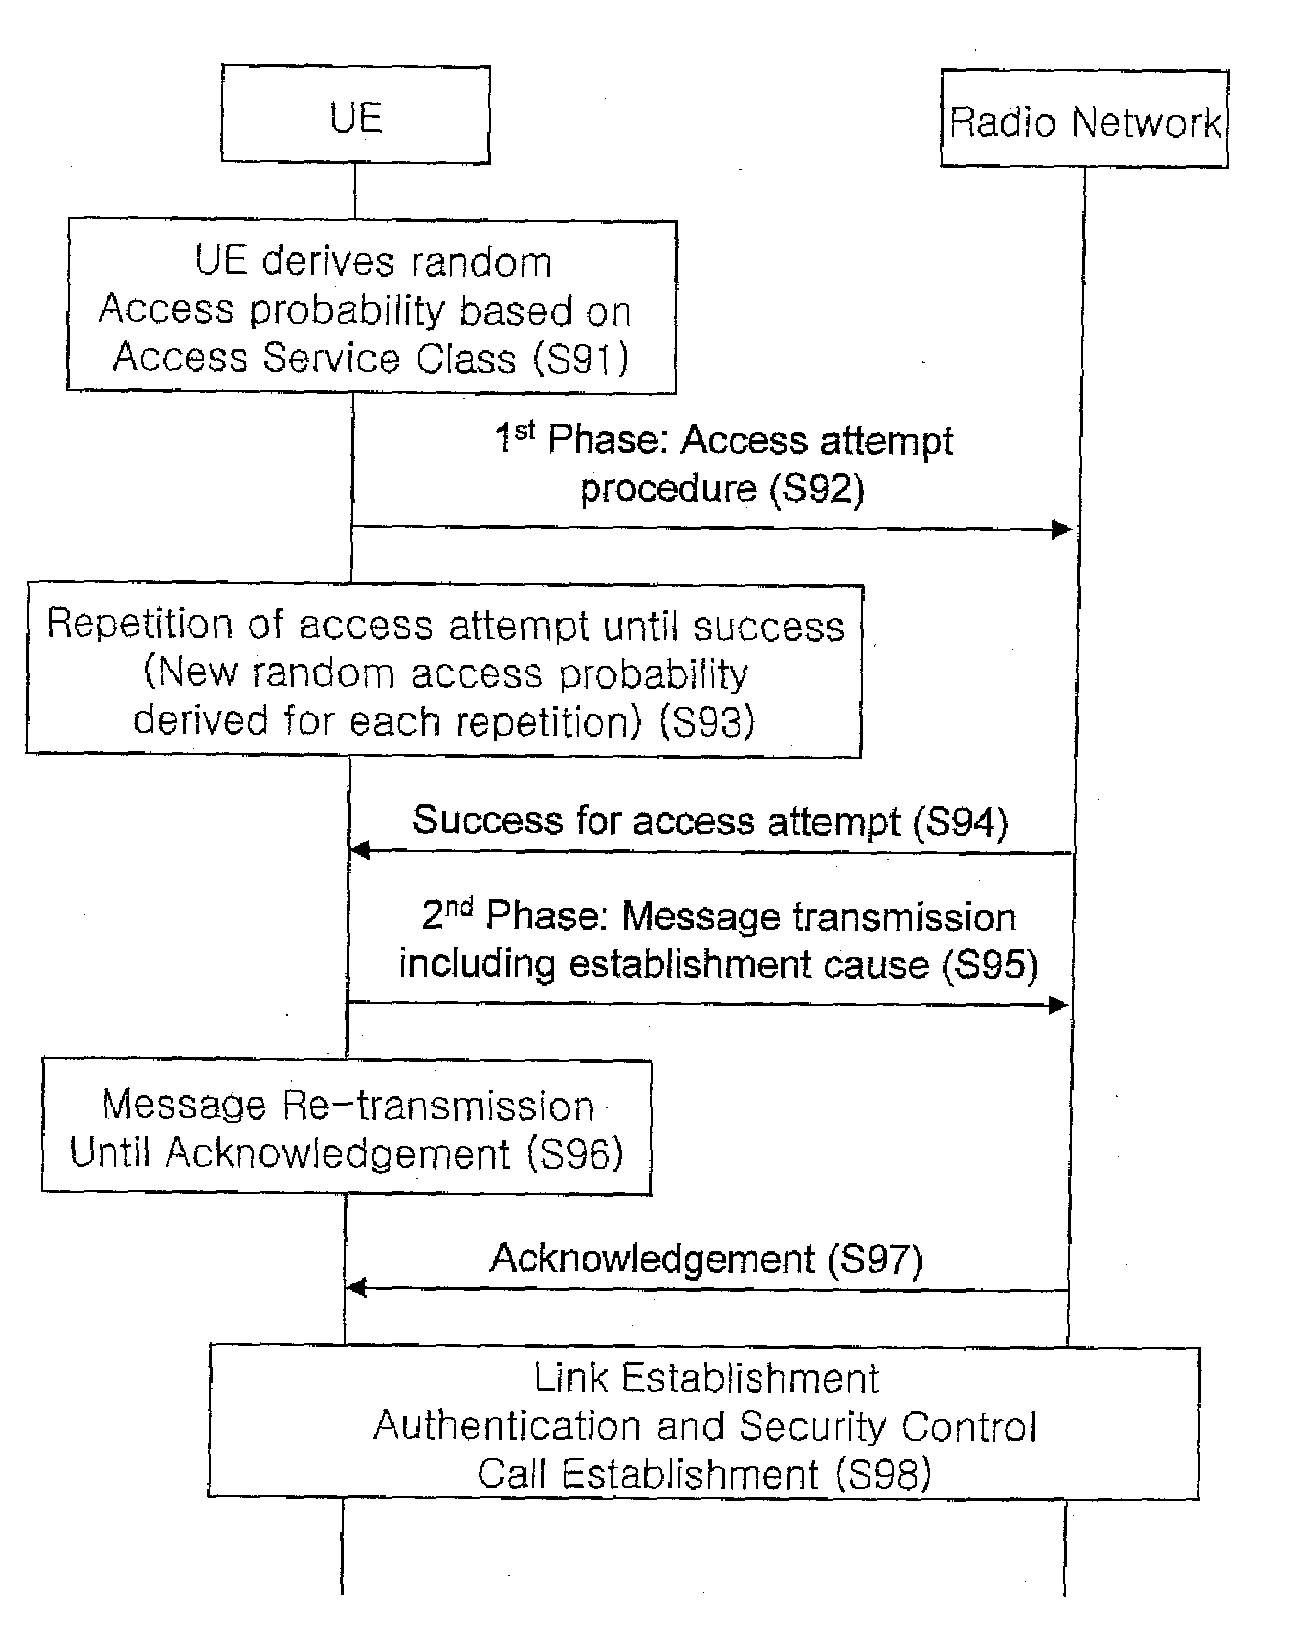 Method and Protocol for Handling Access Attemptsfor Communications Systems